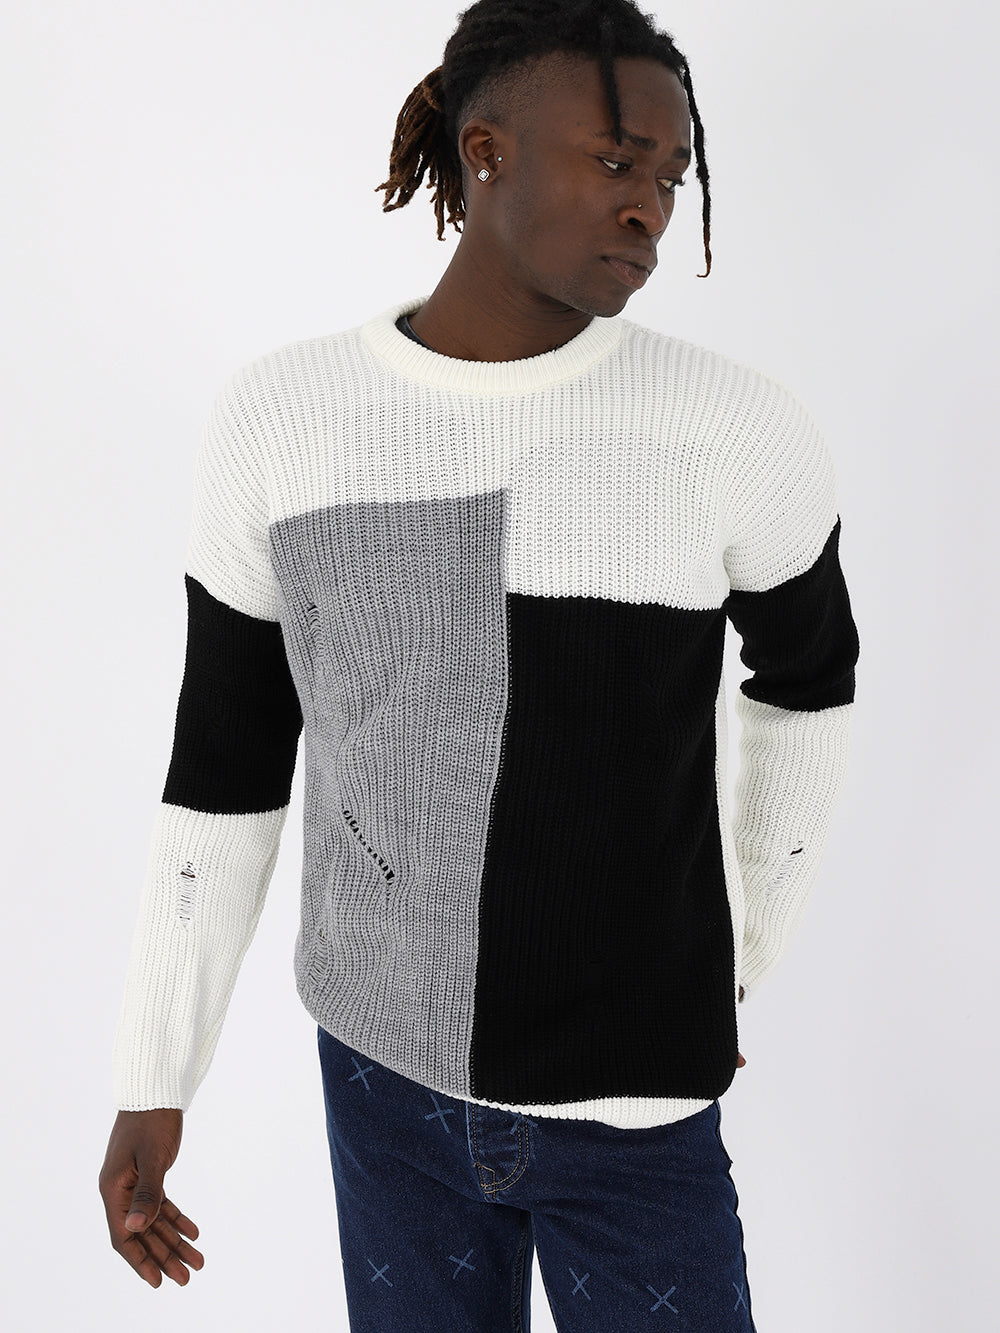 A man wearing a DISTRESSED GENTLEMAN SWEATER | MULTICOLOR in black, white, and grey.